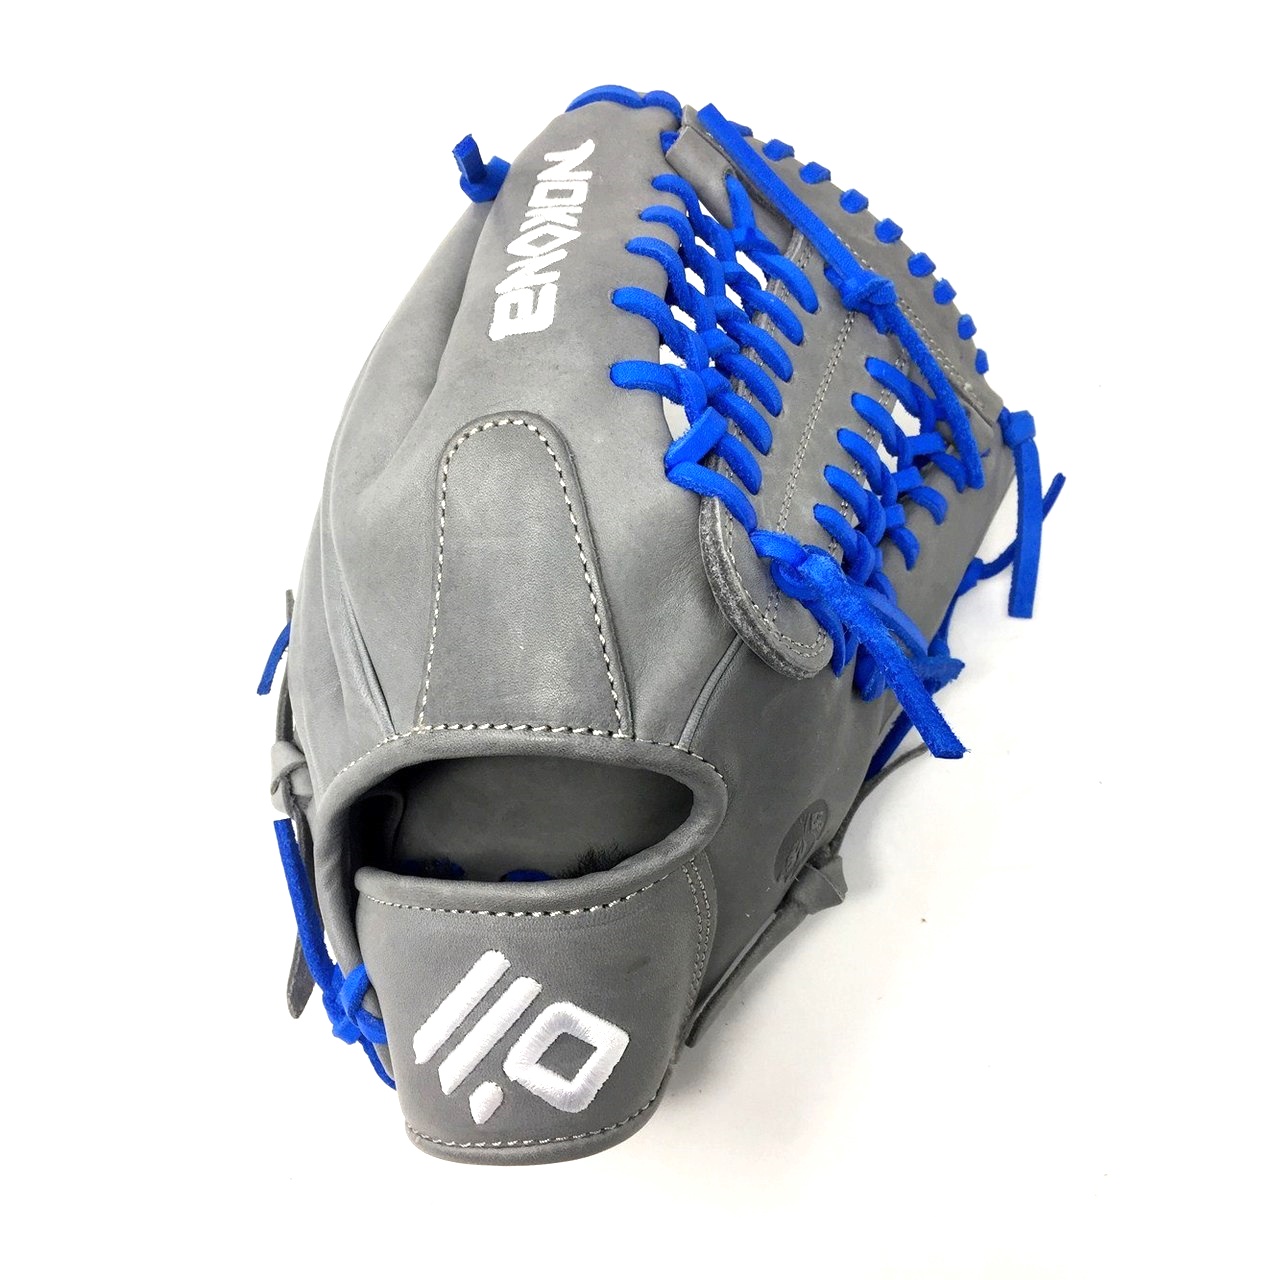 nokona-american-kip-gray-with-royal-laces-11-5-baseball-glove-mod-trap-web-right-hand-throw A-1150M-GR-RY-RightHandThrow Nokona Does Not Apply The American Kip series made with the finest American steer hide